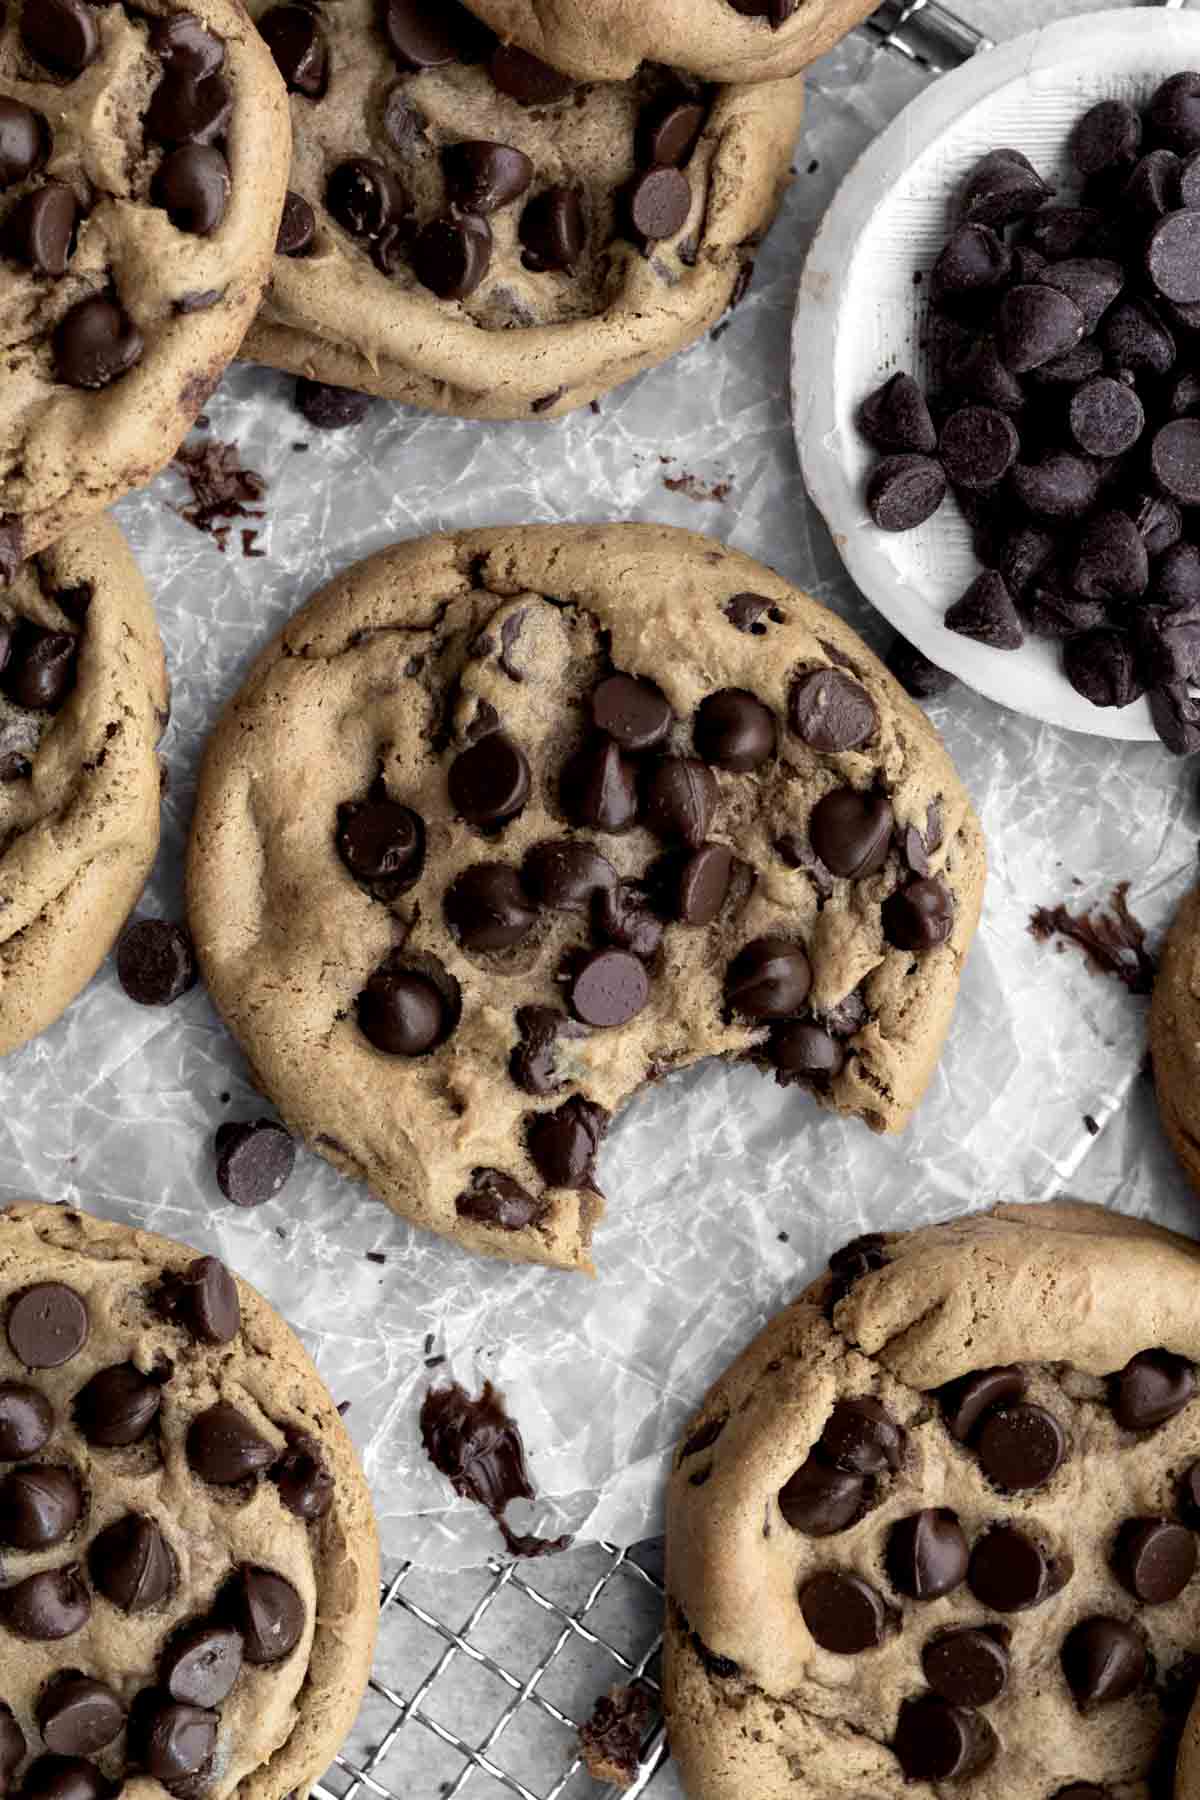 Looking down on chocolate chip cookies, one with a bite.